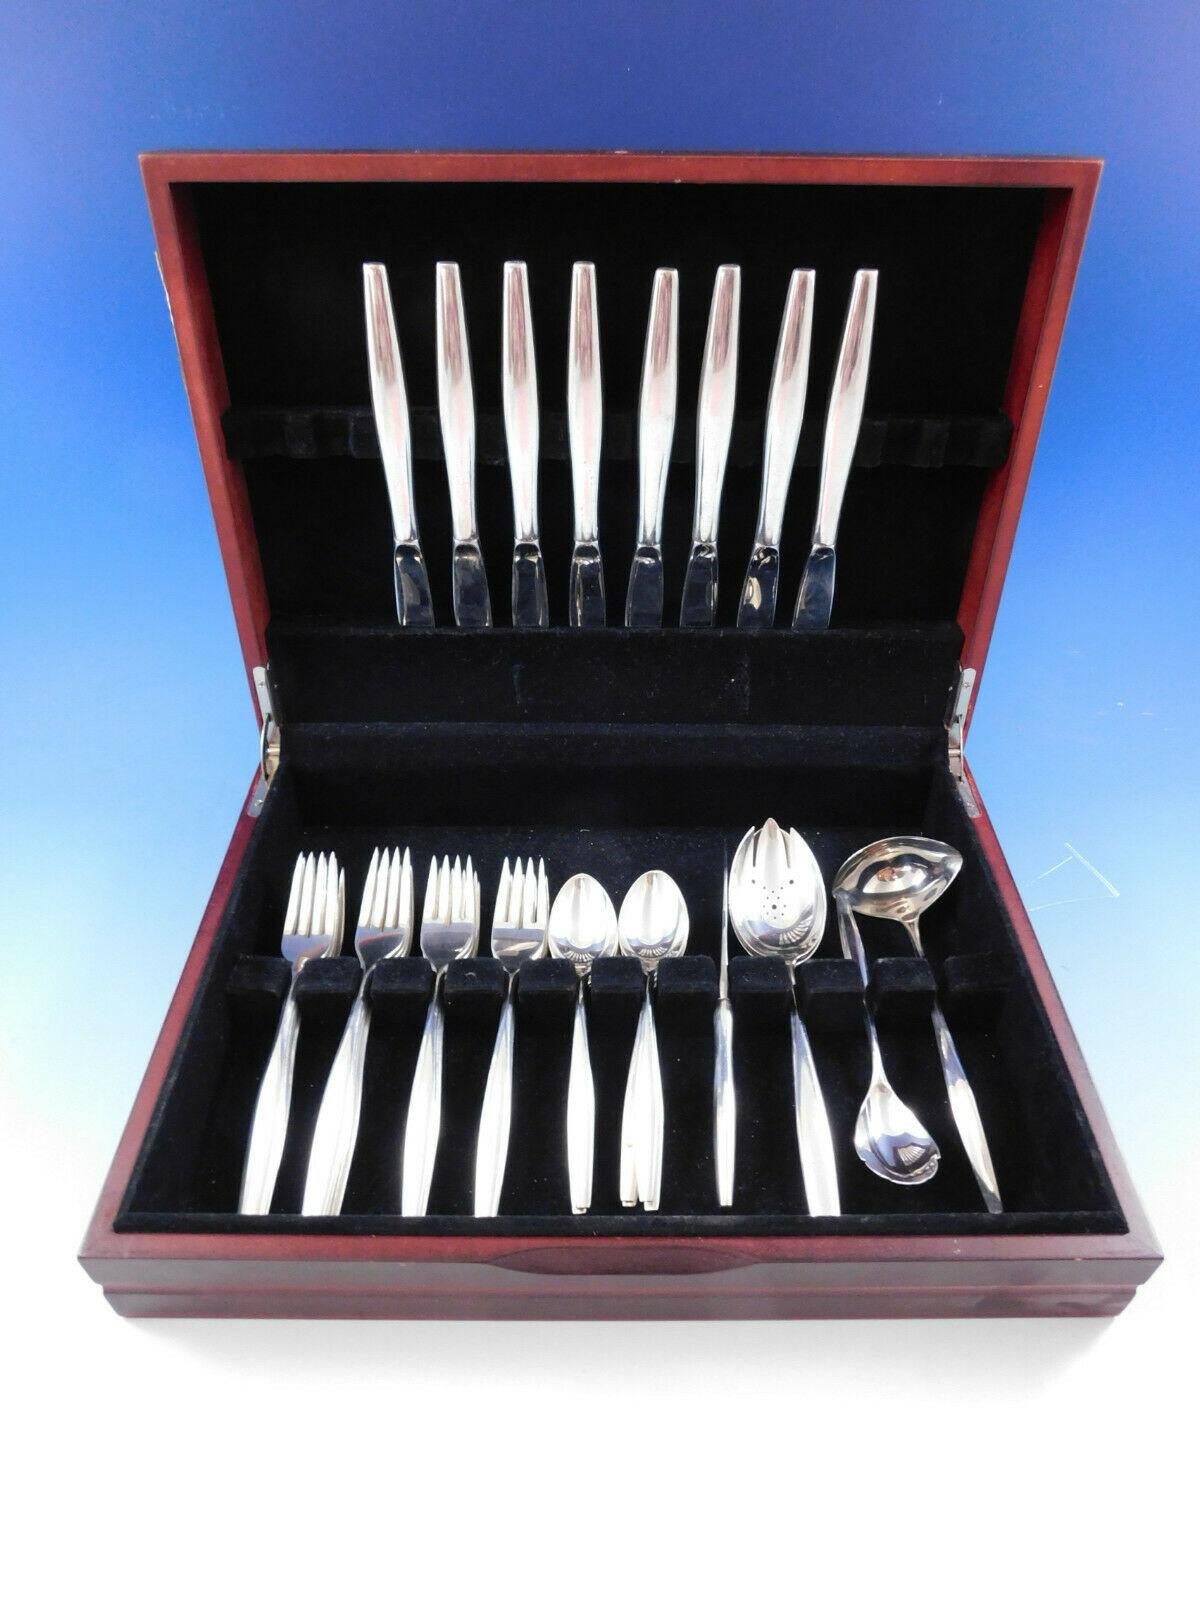 Mid-Century Modern Signet by Kirk sterling silver flatware set, 55 pieces. This unadorned pattern with modern, elongated handles was introduced by Kirk in the year 1958. This set includes:

8 knives, 9